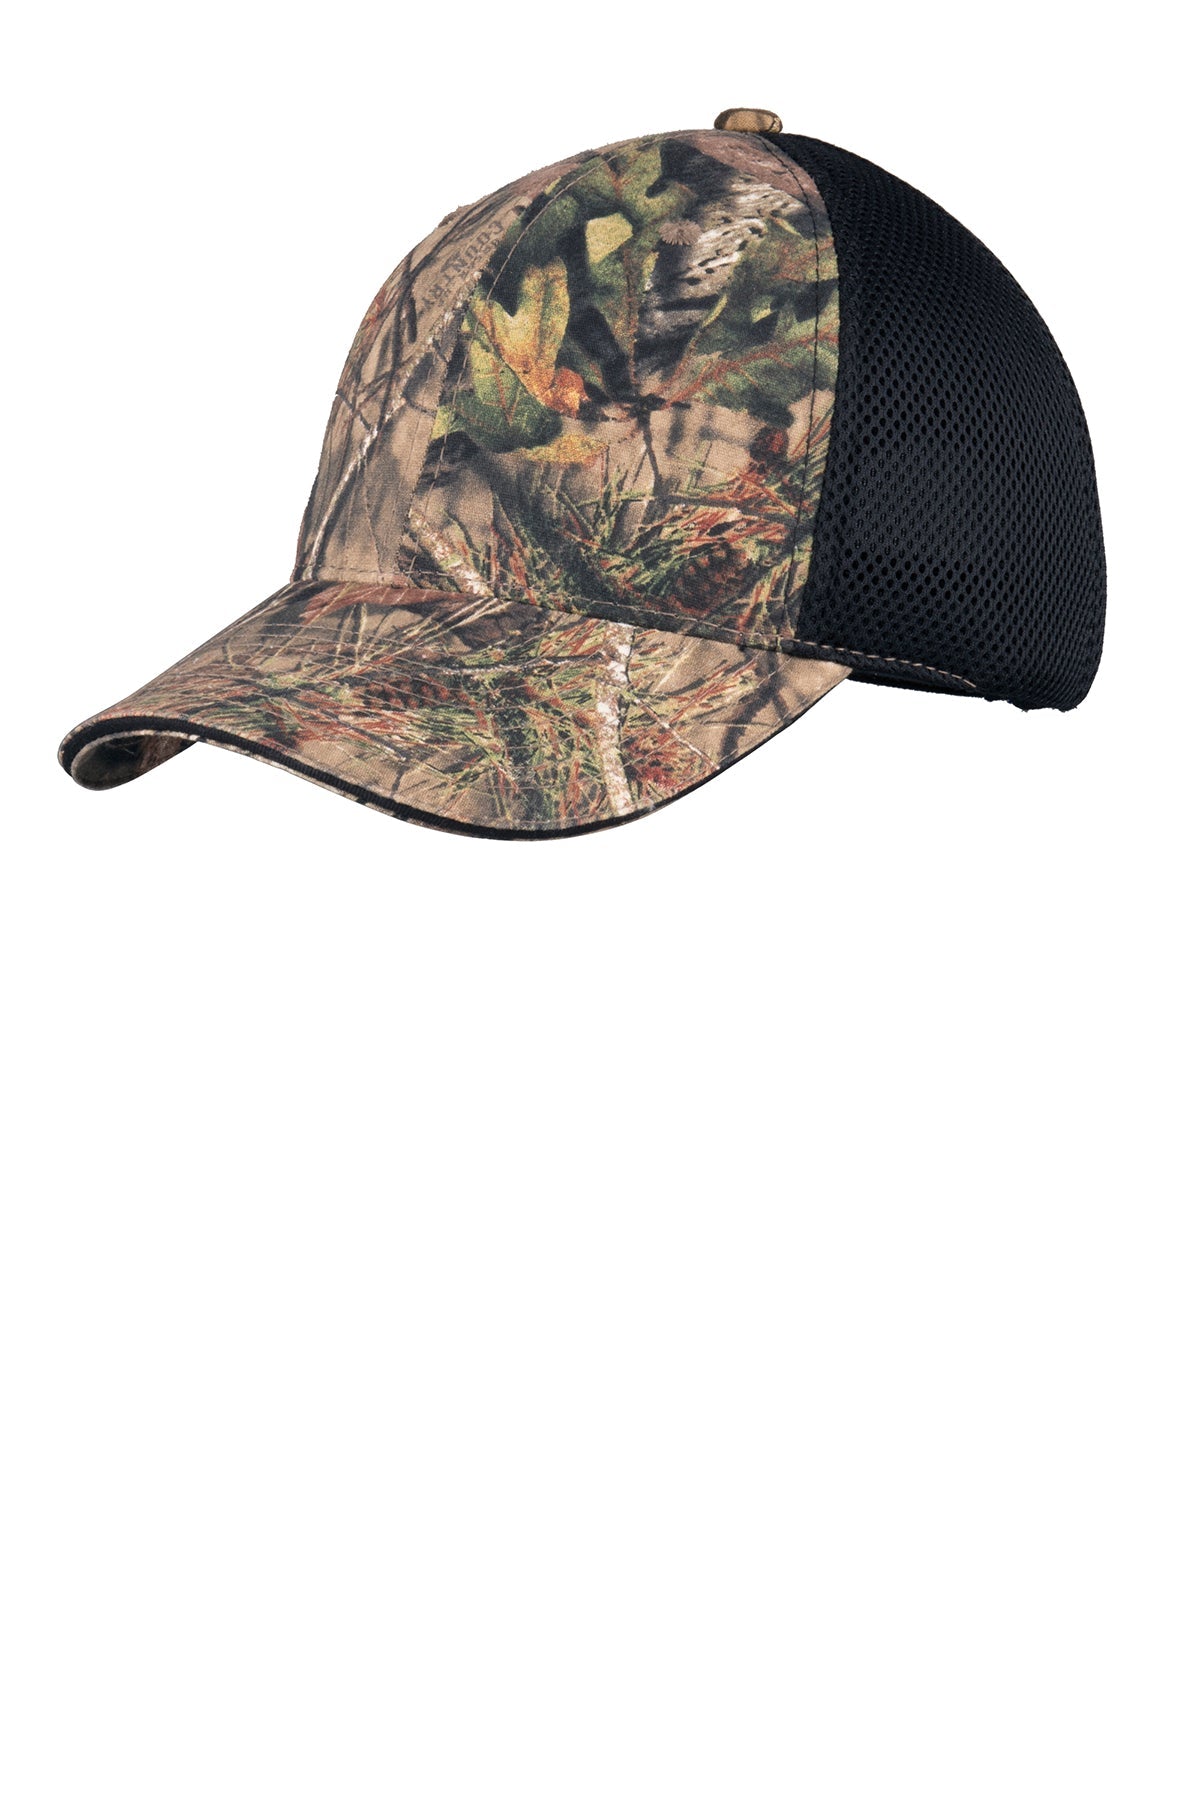 Port Authority Camouflage Custom Caps with Air Mesh Back, Mossy Oak Break-Up Country/Black Mesh